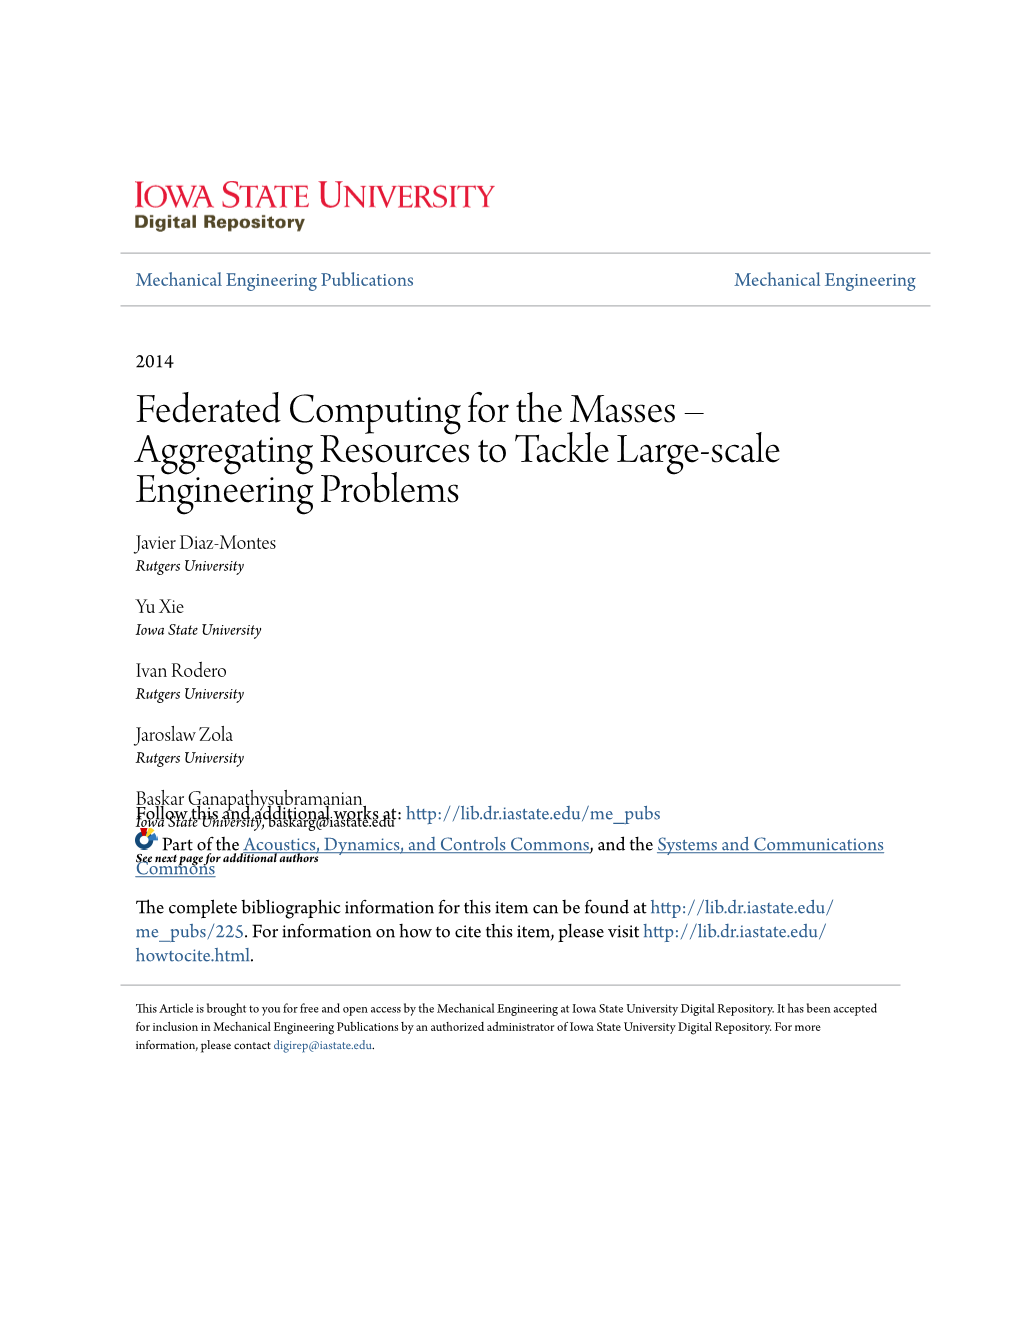 Federated Computing for the Masses – Aggregating Resources to Tackle Large-Scale Engineering Problems Javier Diaz-Montes Rutgers University